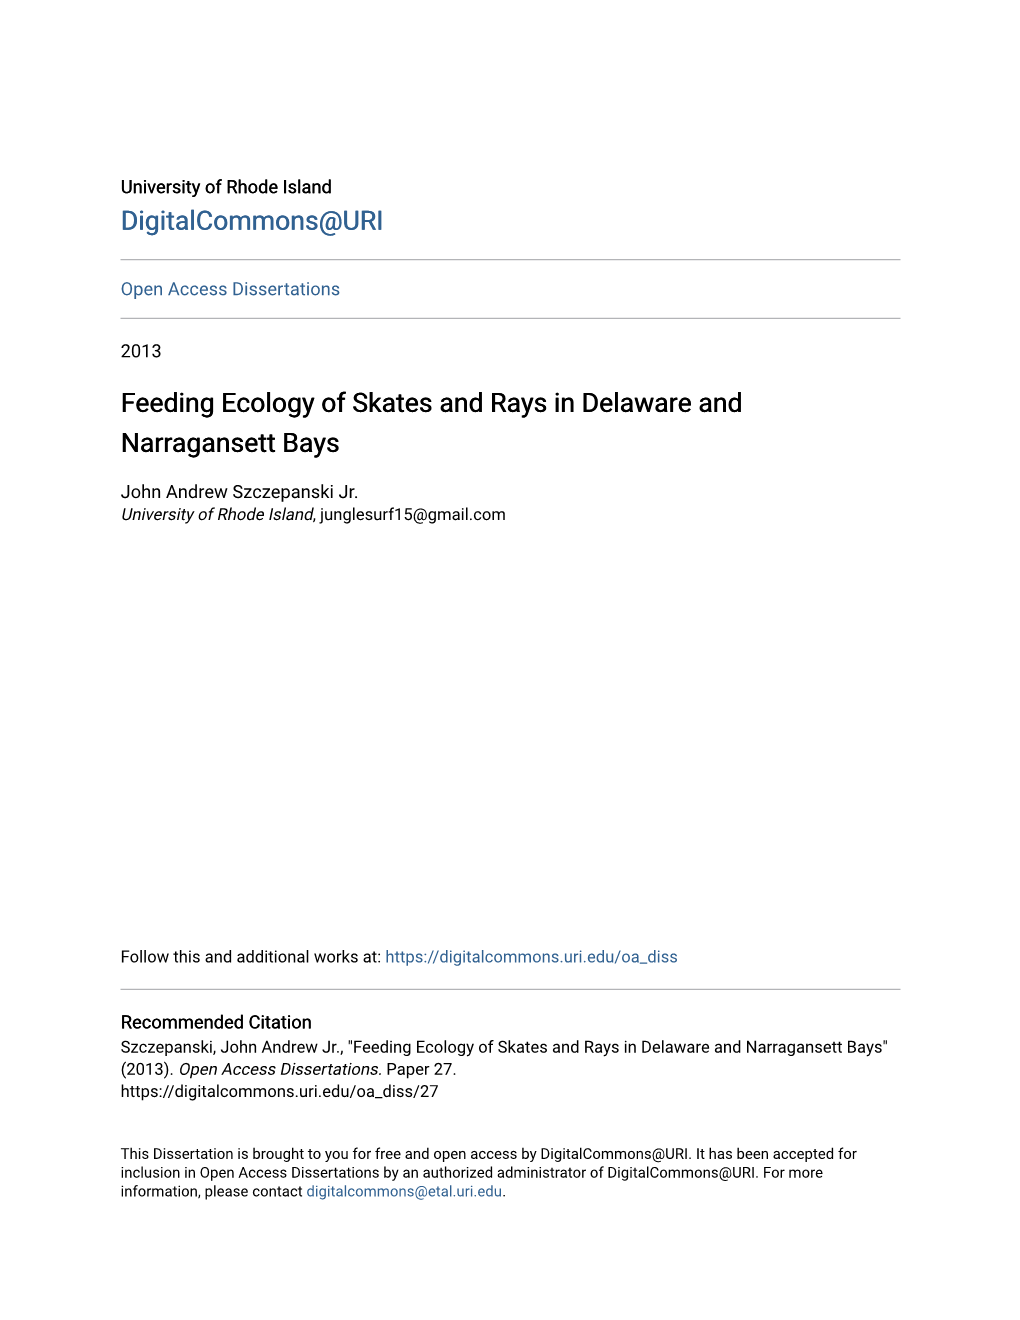 Feeding Ecology of Skates and Rays in Delaware and Narragansett Bays